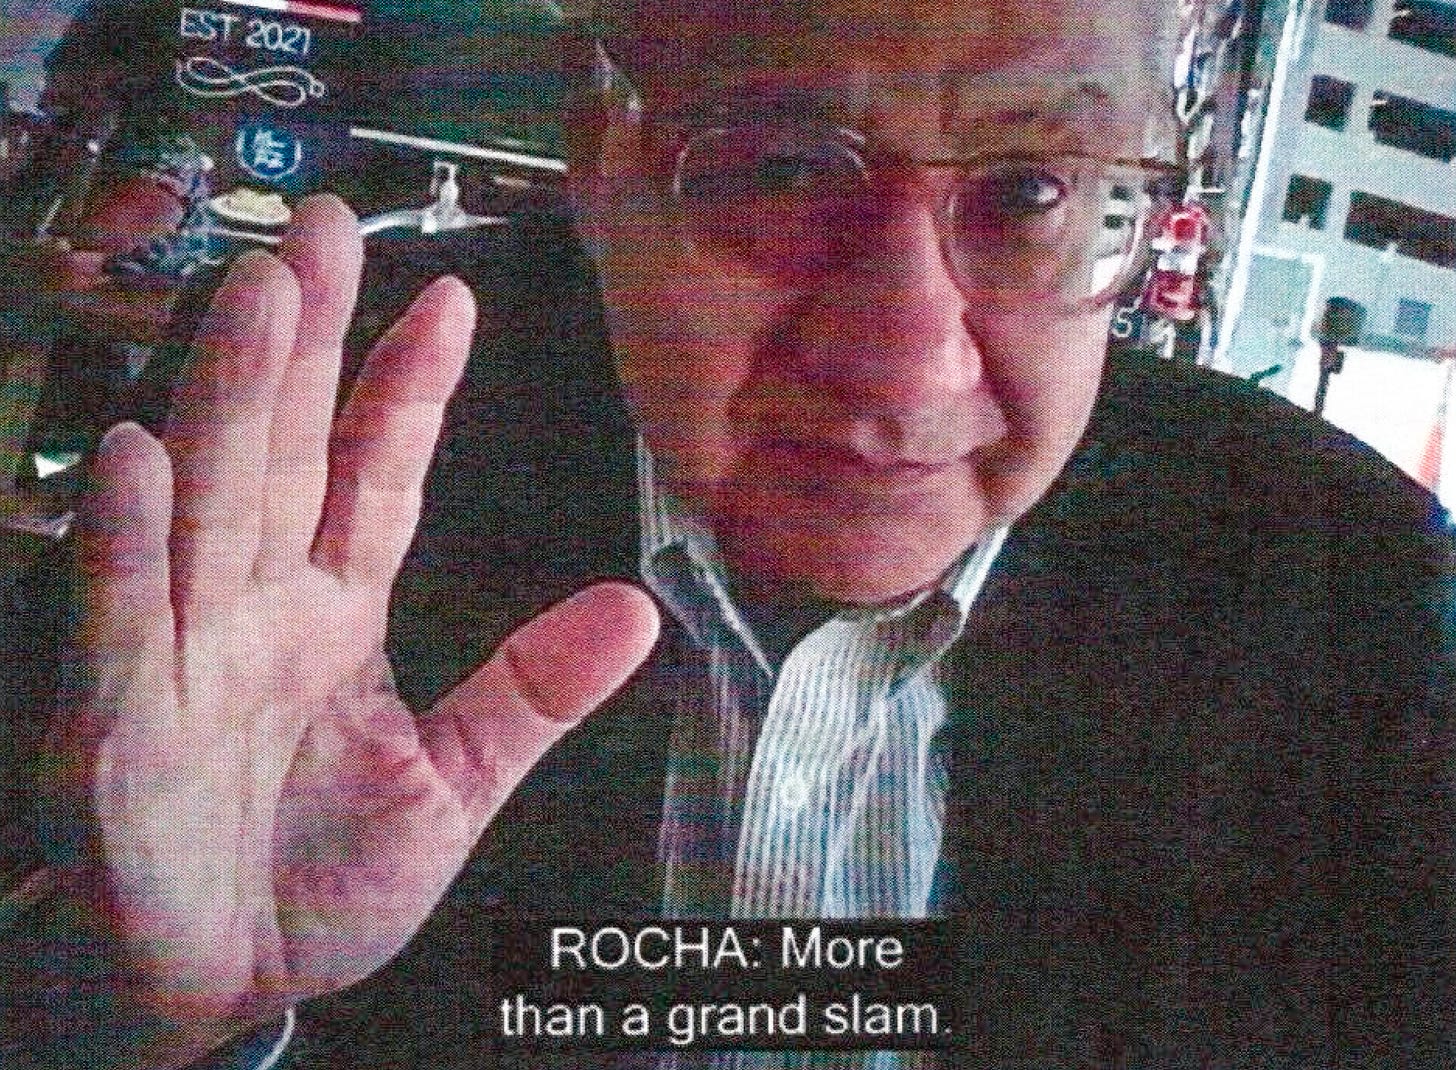 This image provided by the Justice Department and contained in the affidavit in support of a criminal complaint, shows Manuel Rocha during a meeting with a FBI undercover employee.